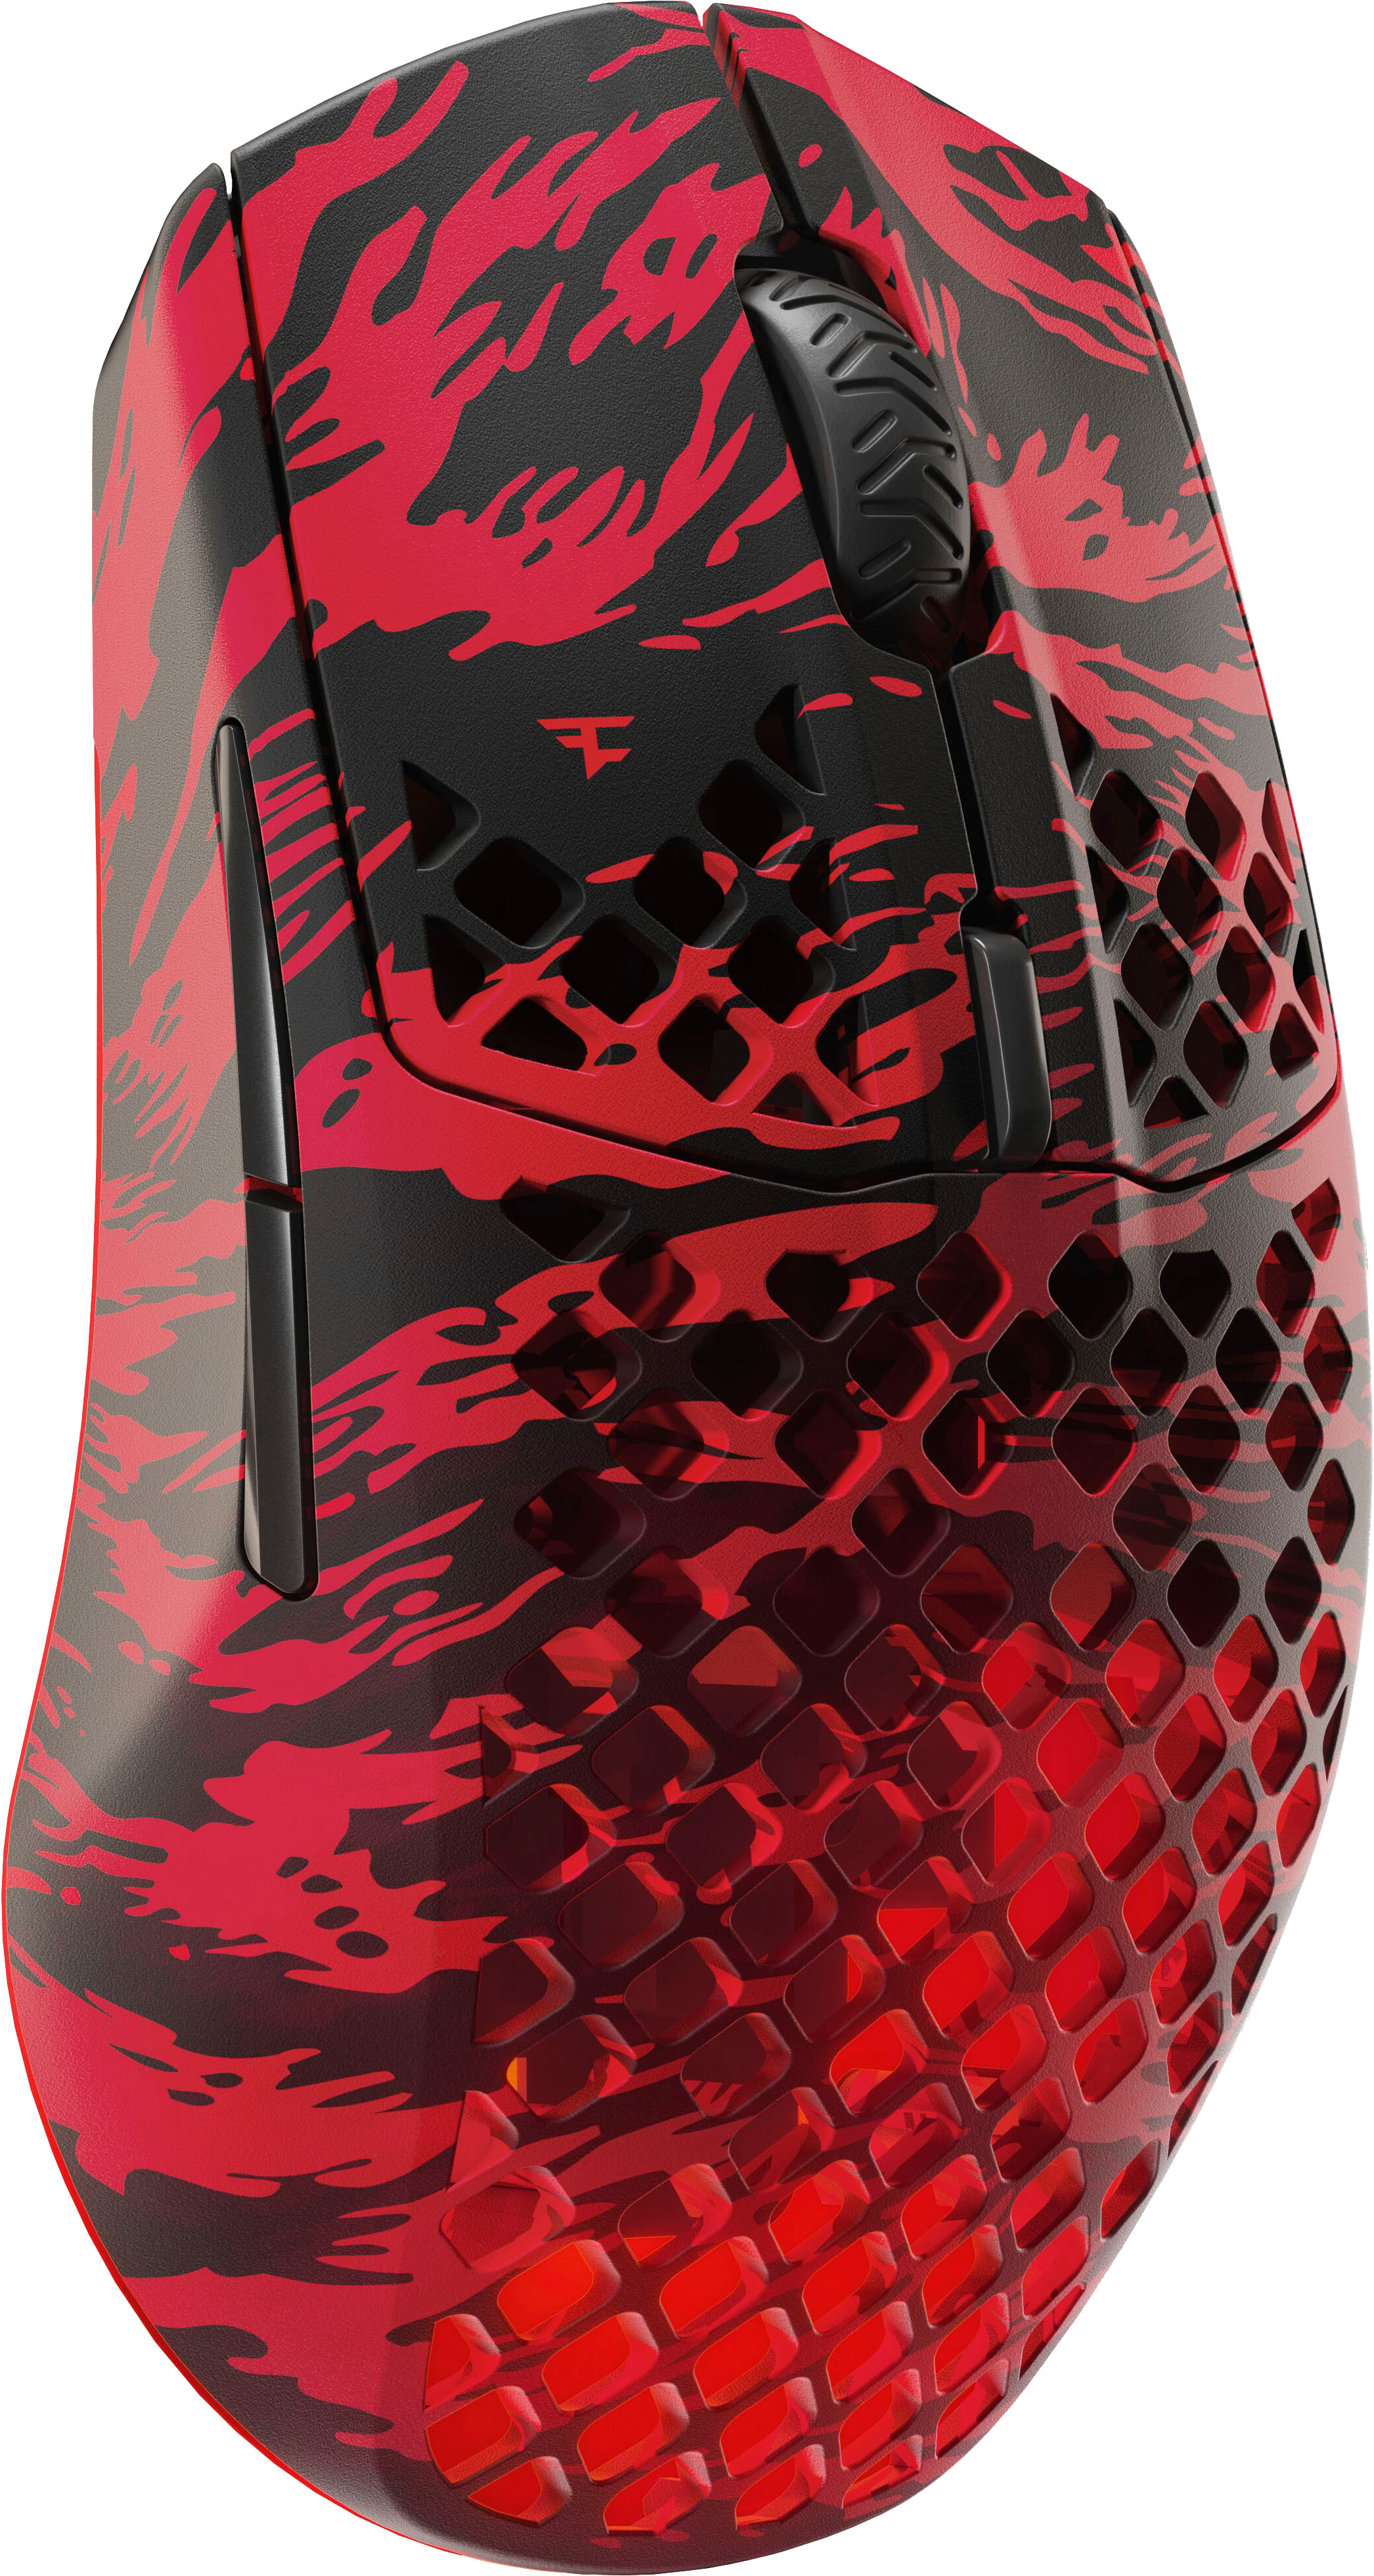 SteelSeries Aerox 3 Super Light Honeycomb Wireless RGB Optical Gaming Mouse FaZe Clan Limited Edition 62609 - Best Buy